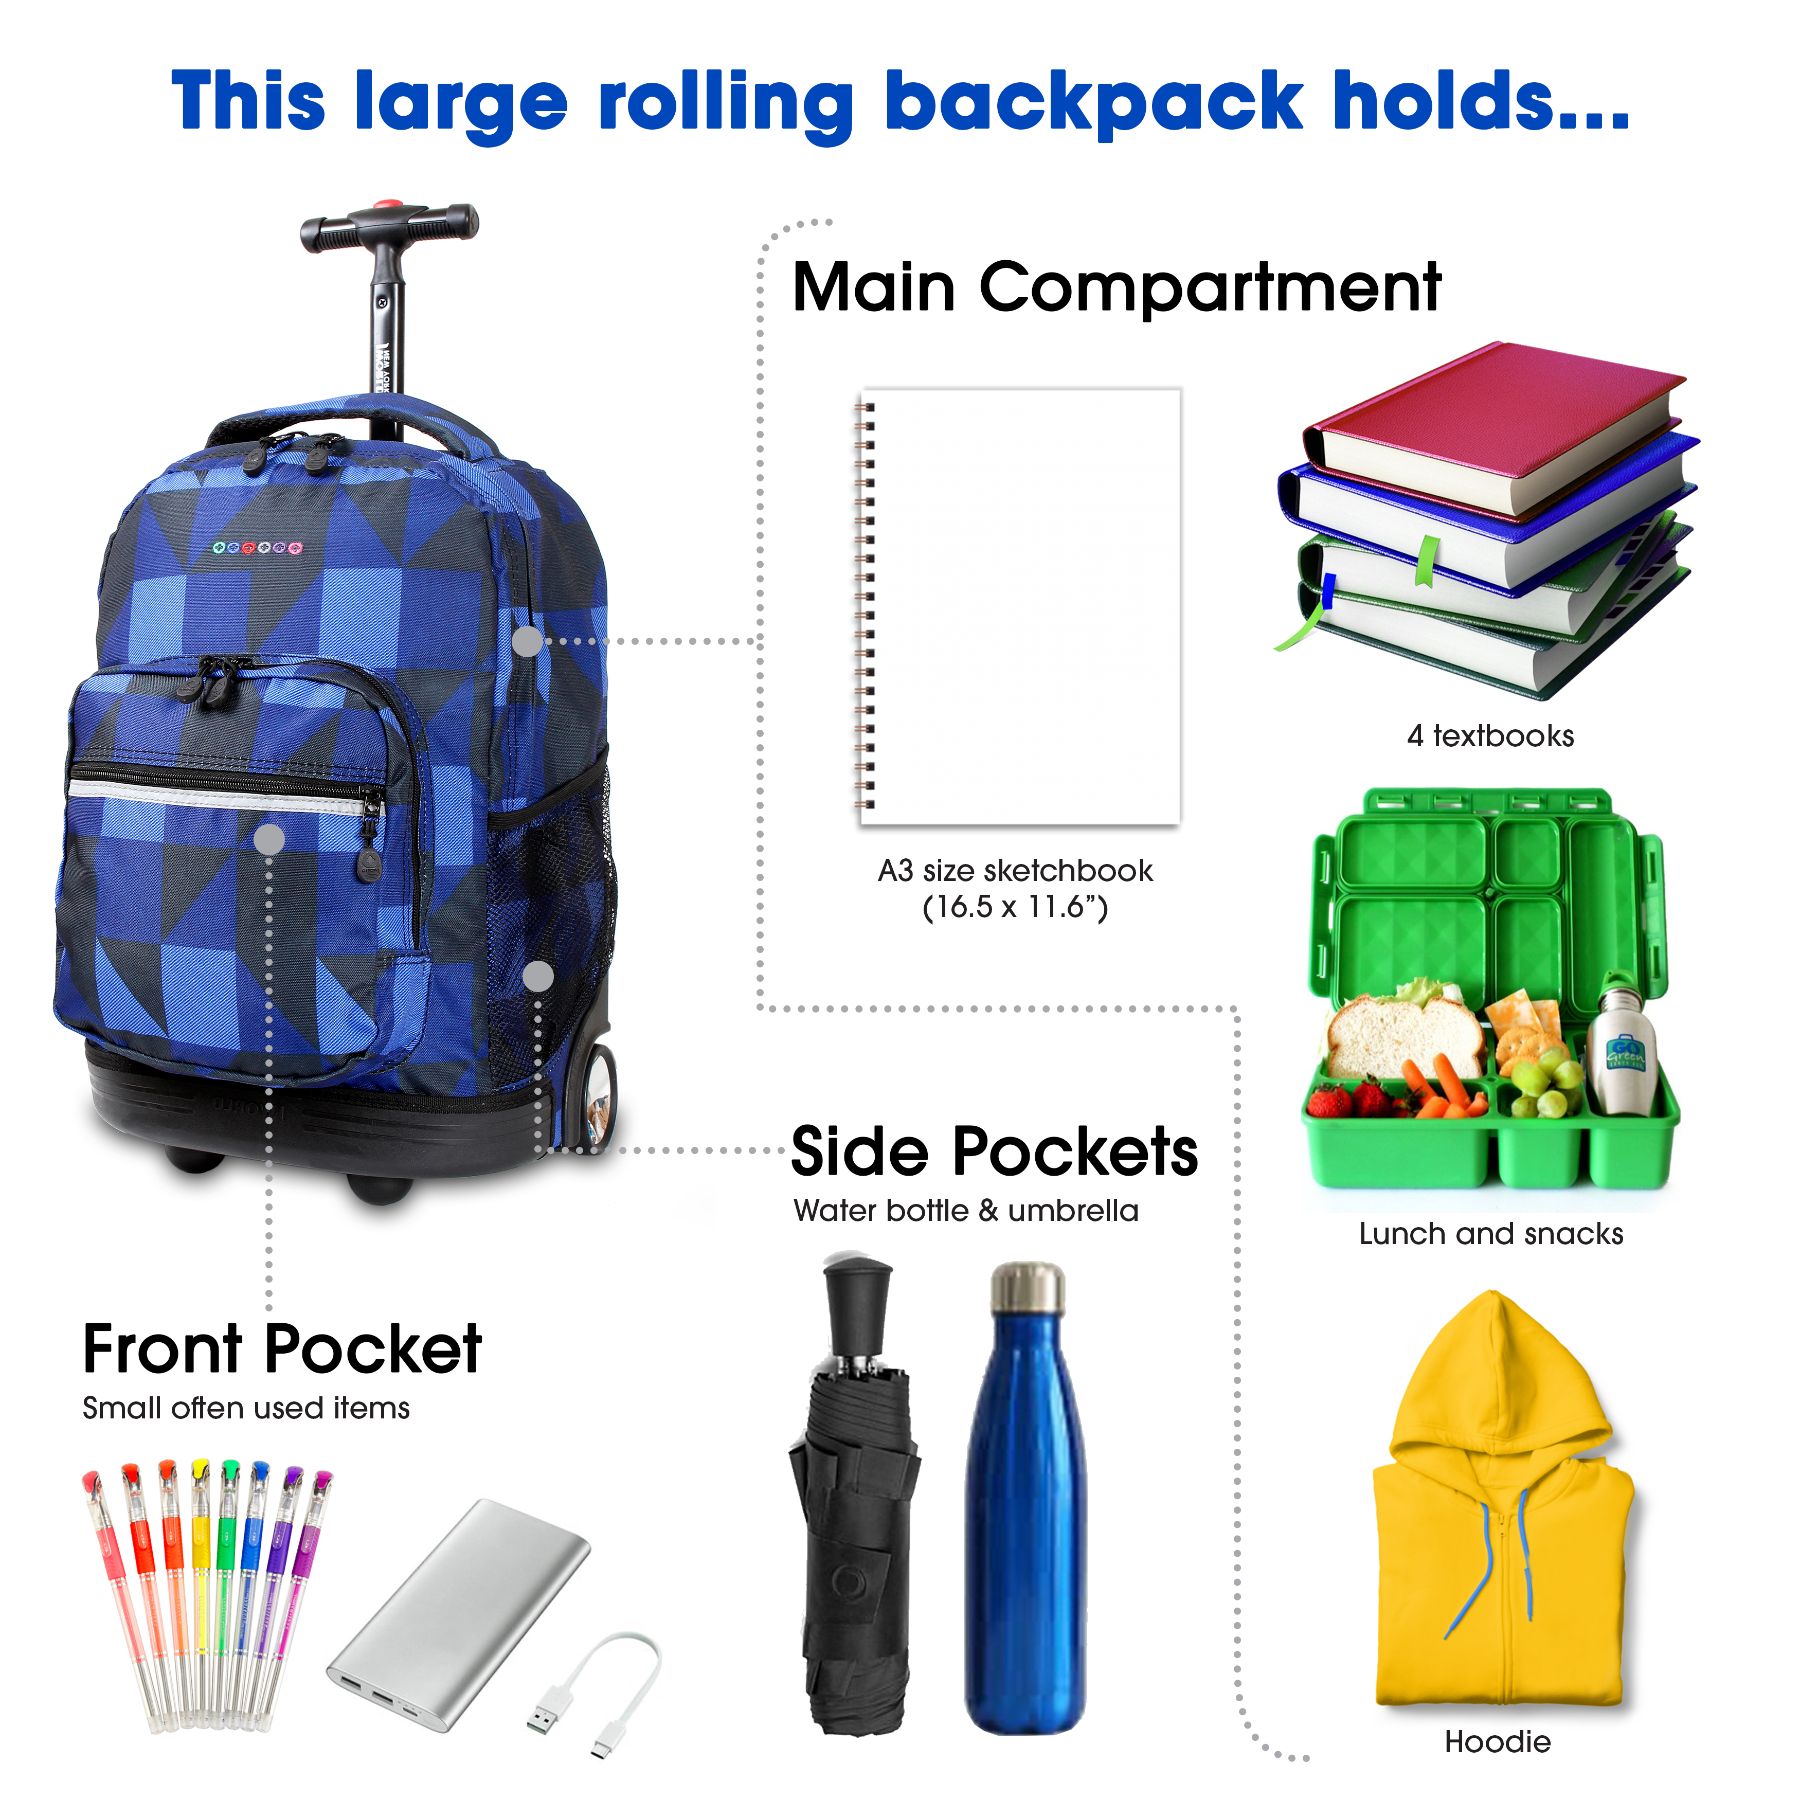 J World Boys and Girls Sunrise 18" Rolling Backpack for School and Travel, Block Navy - image 4 of 6